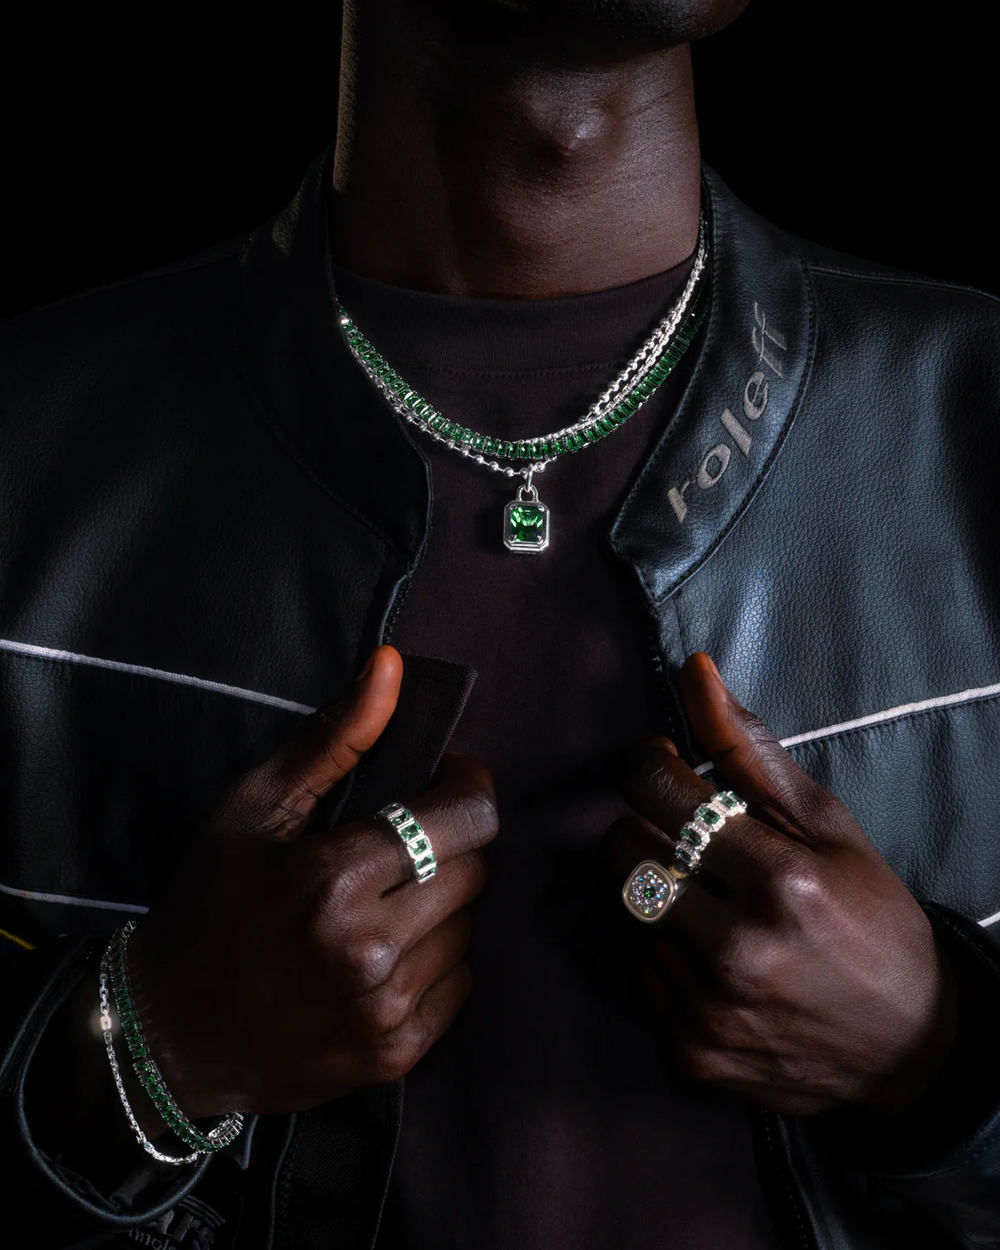 Black man wearing a black T-shirt and leather cafe racer jacket with Hatton Labs luxury silver and green necklaces, a variety of rings and precious stone bracelets.